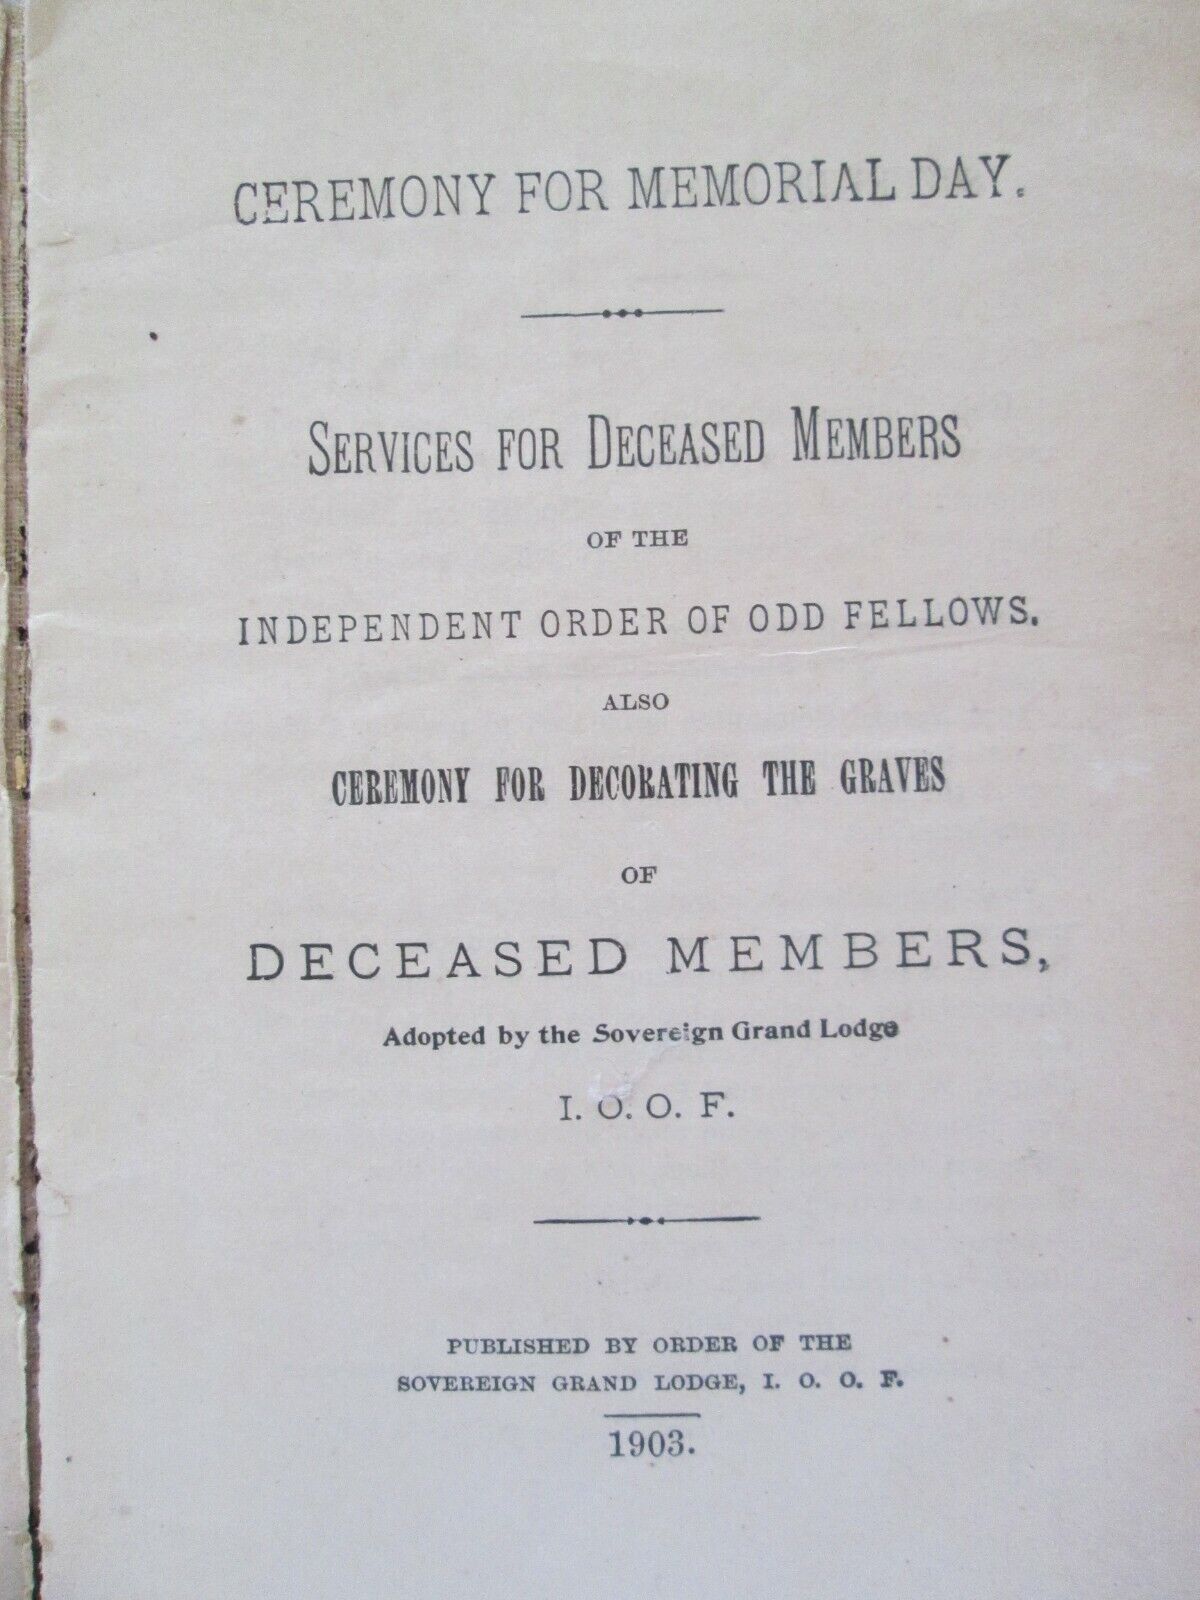 Independent Order of Odd Fellows-Memorial Day-Deceased Members-Graves of Dead